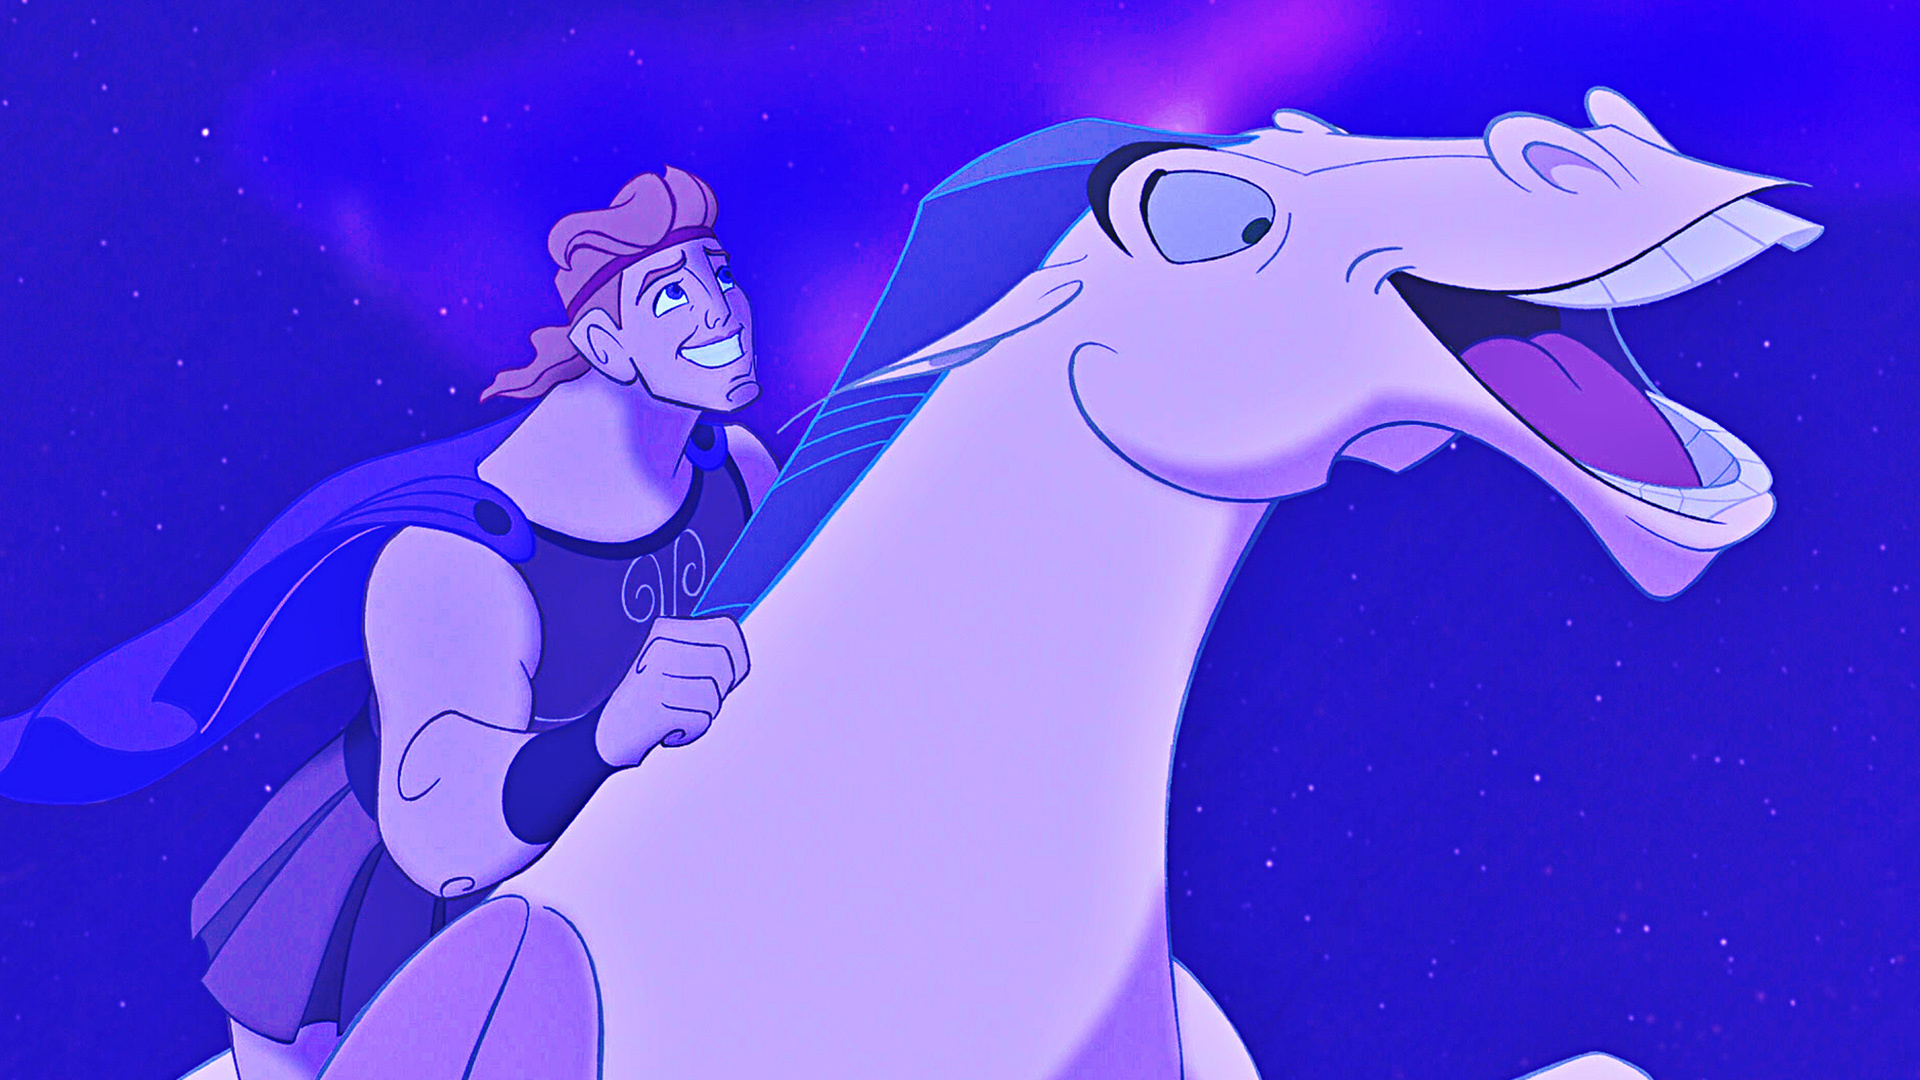 Hercules 1997 HD wallpapers, Backgrounds collection, High-quality imagery, Animated wonder, 1920x1080 Full HD Desktop